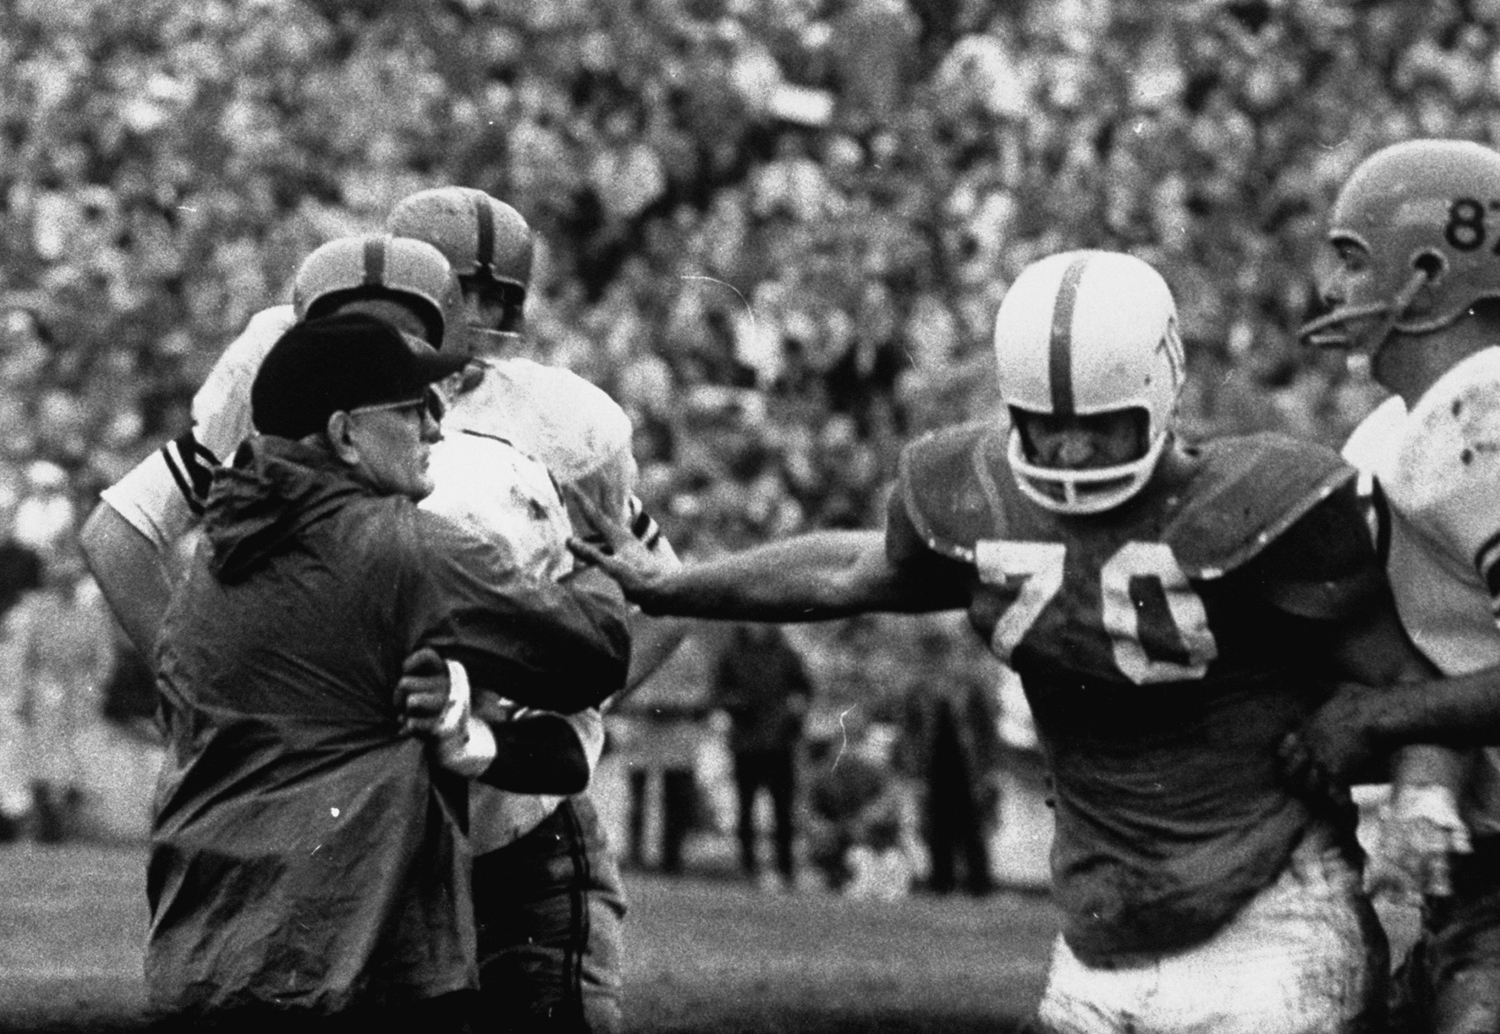 Syracuse coach Benny Schwartzwalder on the field during the 1960 Cotton Bowl against Texas, trying to break up a fight.